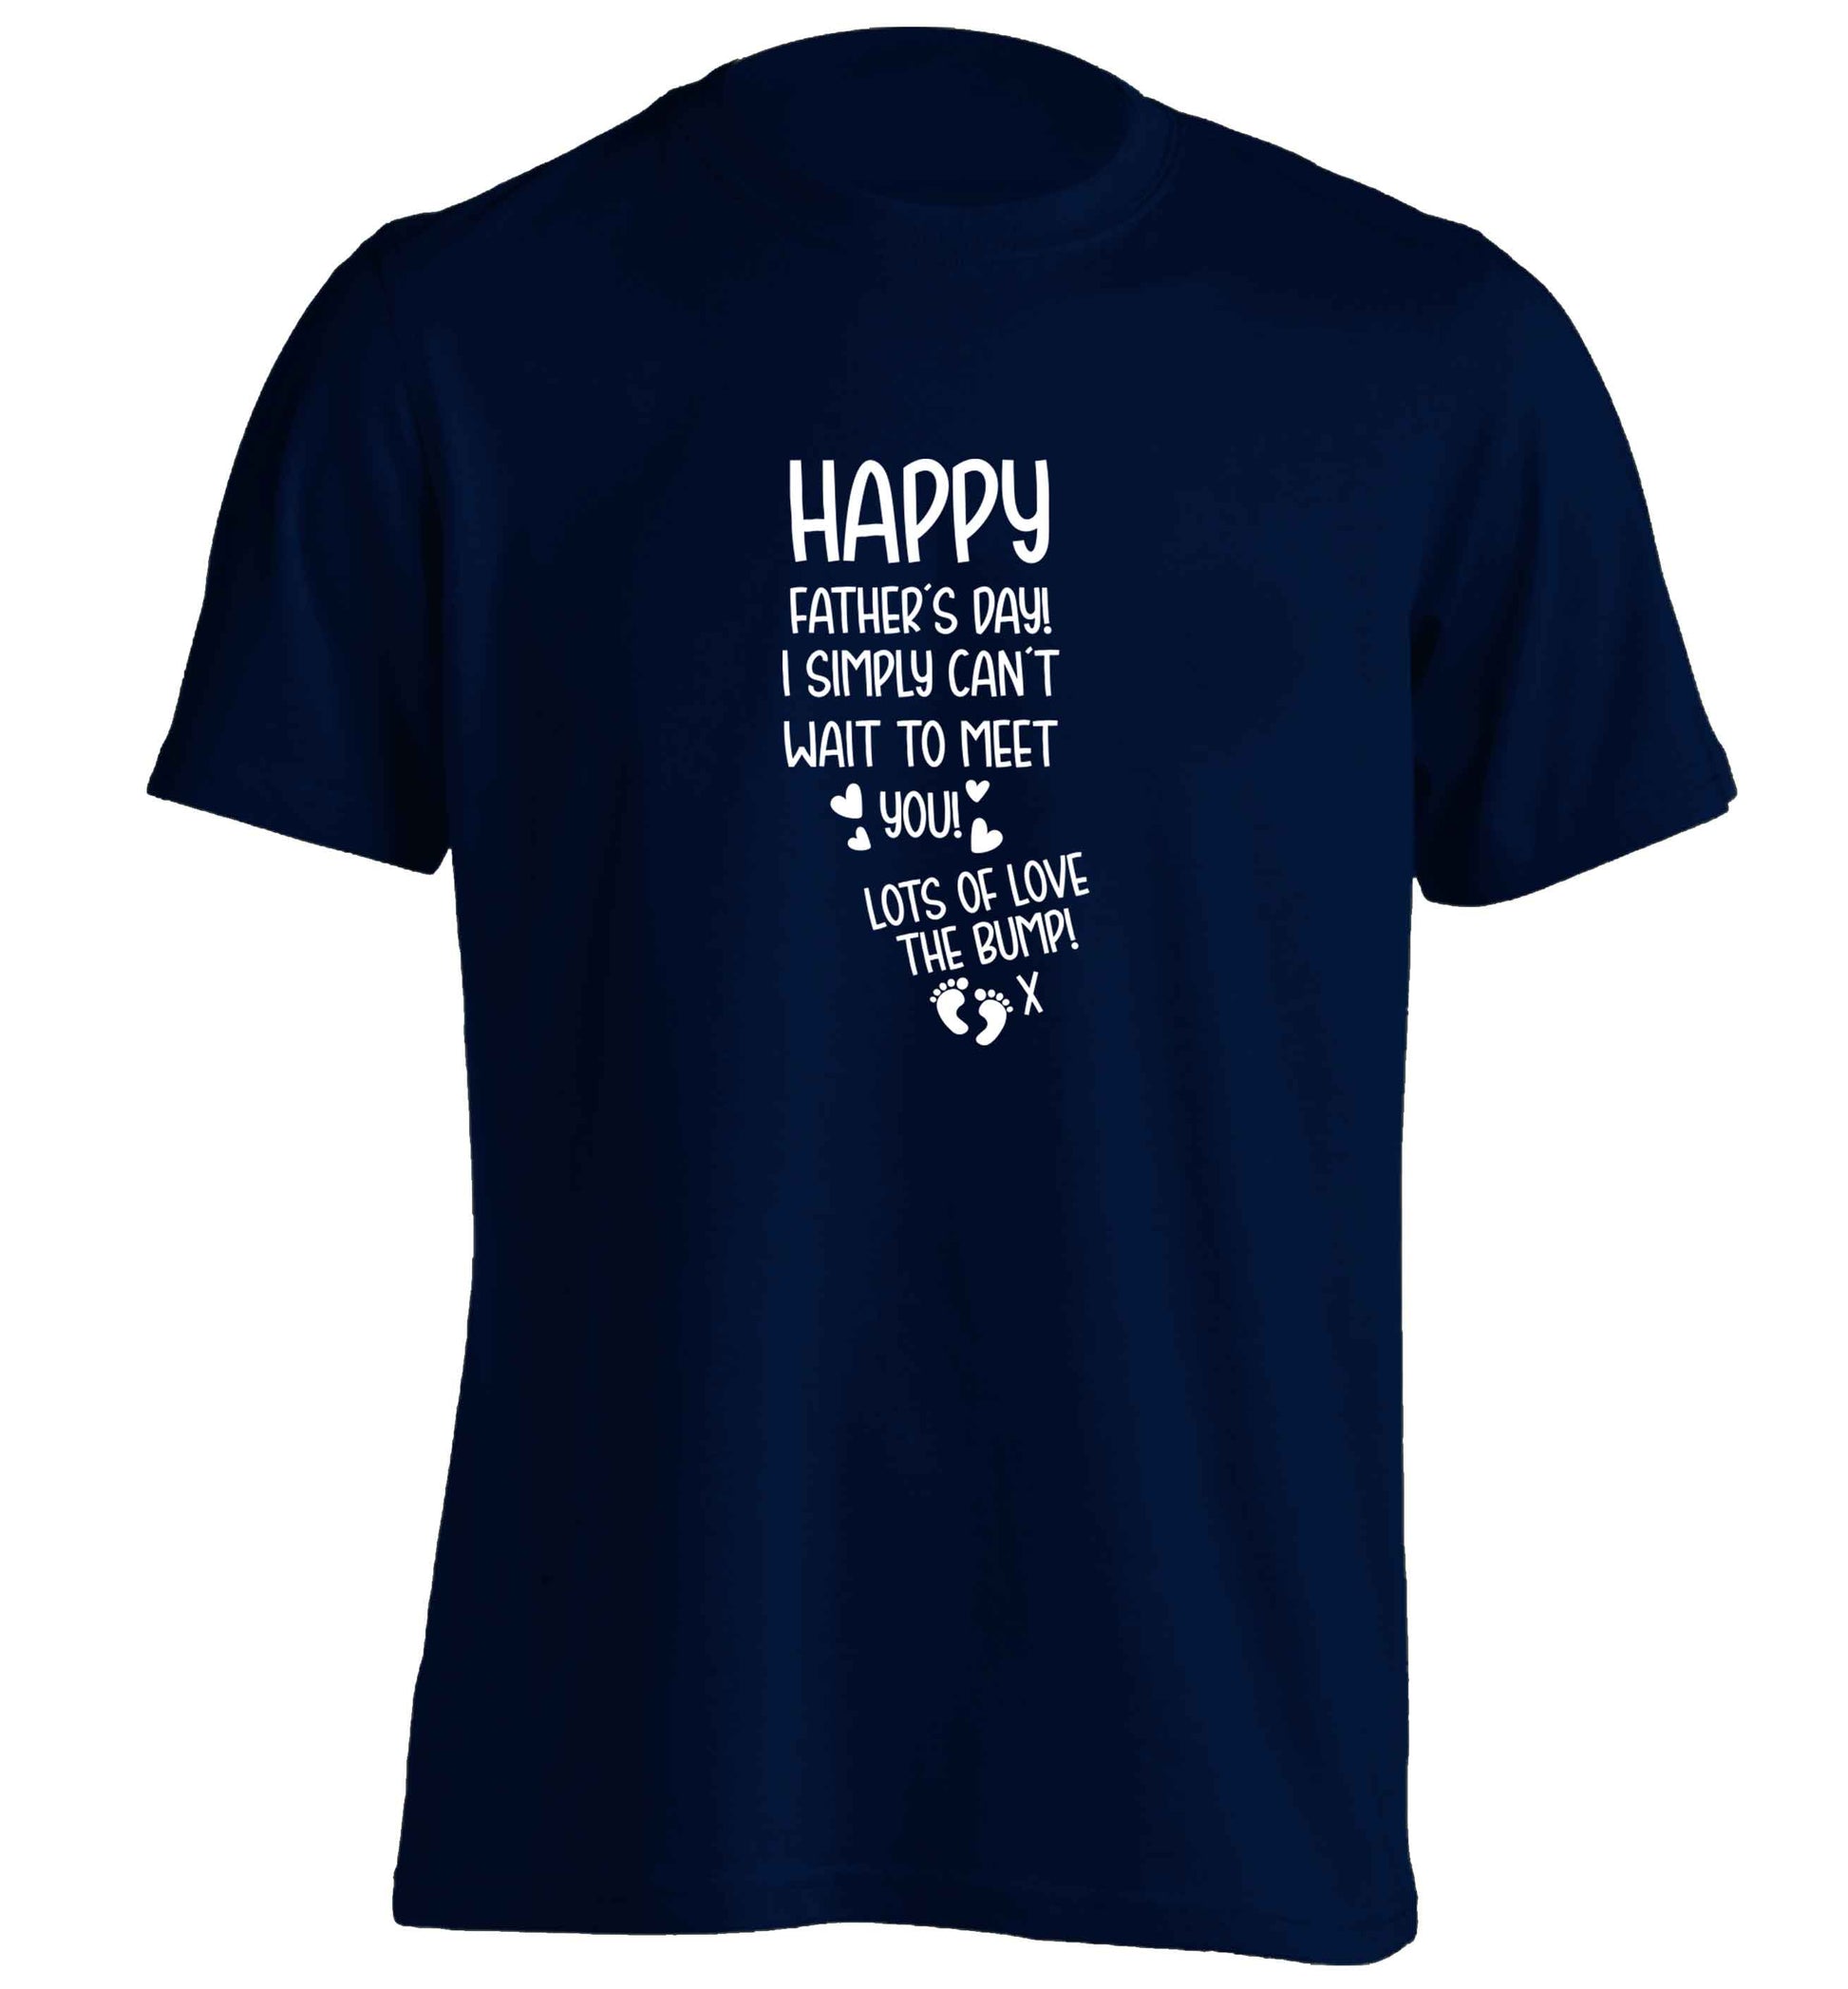 Happy Father's day daddy I can't wait to meet you lot's of love the bump! adults unisex navy Tshirt 2XL